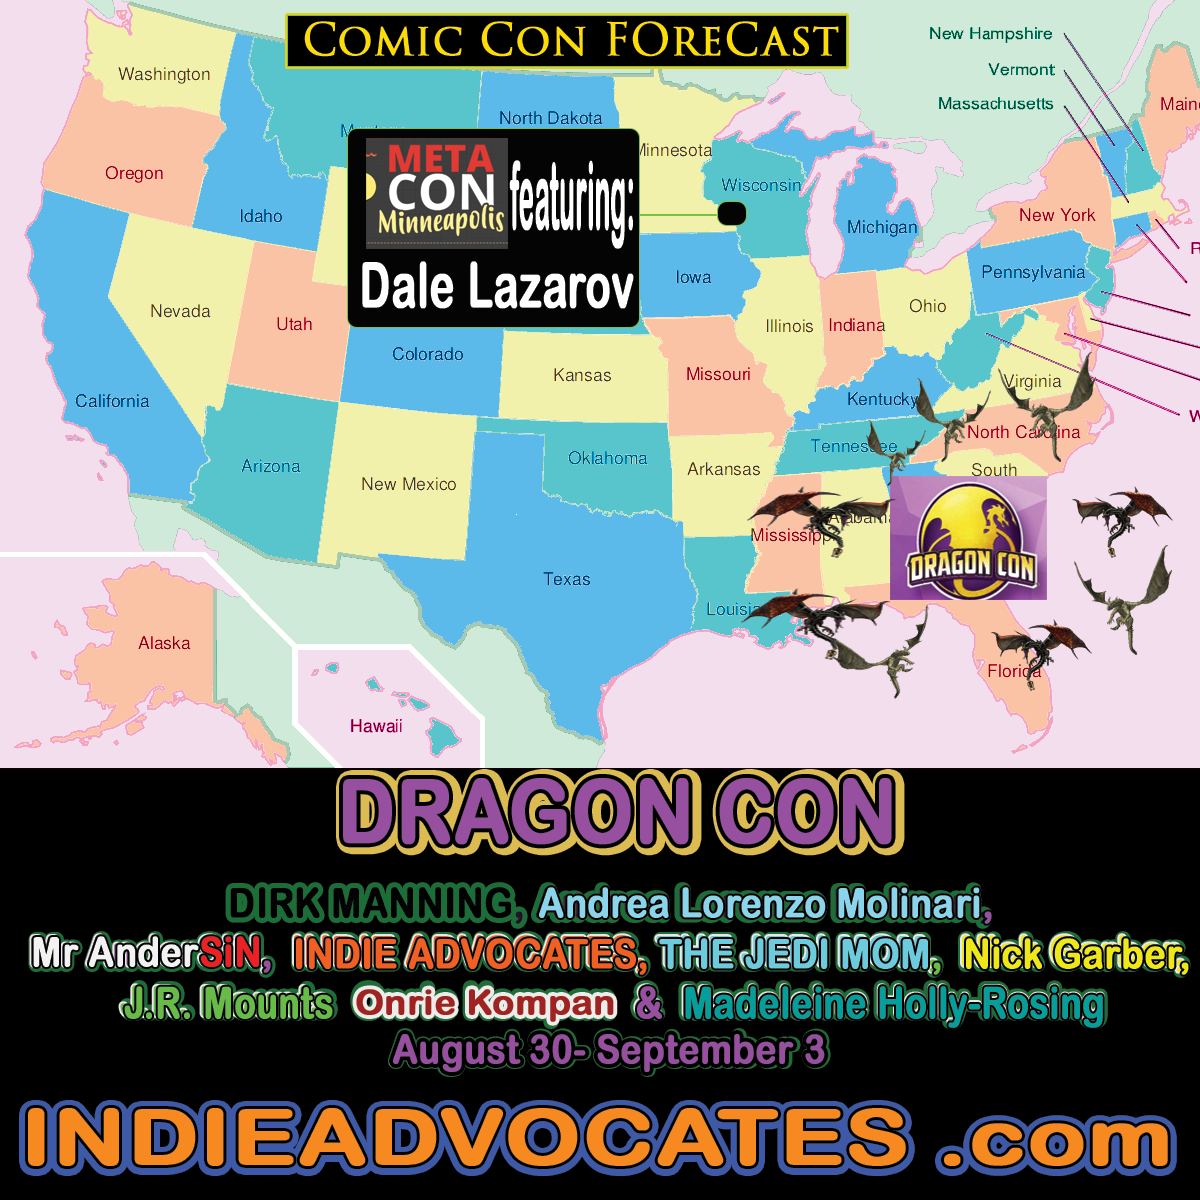 THE COMIC CON HIGHWAY WEEKEND FORECAST:: For A DRAGON of a WEEKEND for Labor Day WEEKEND 35.18